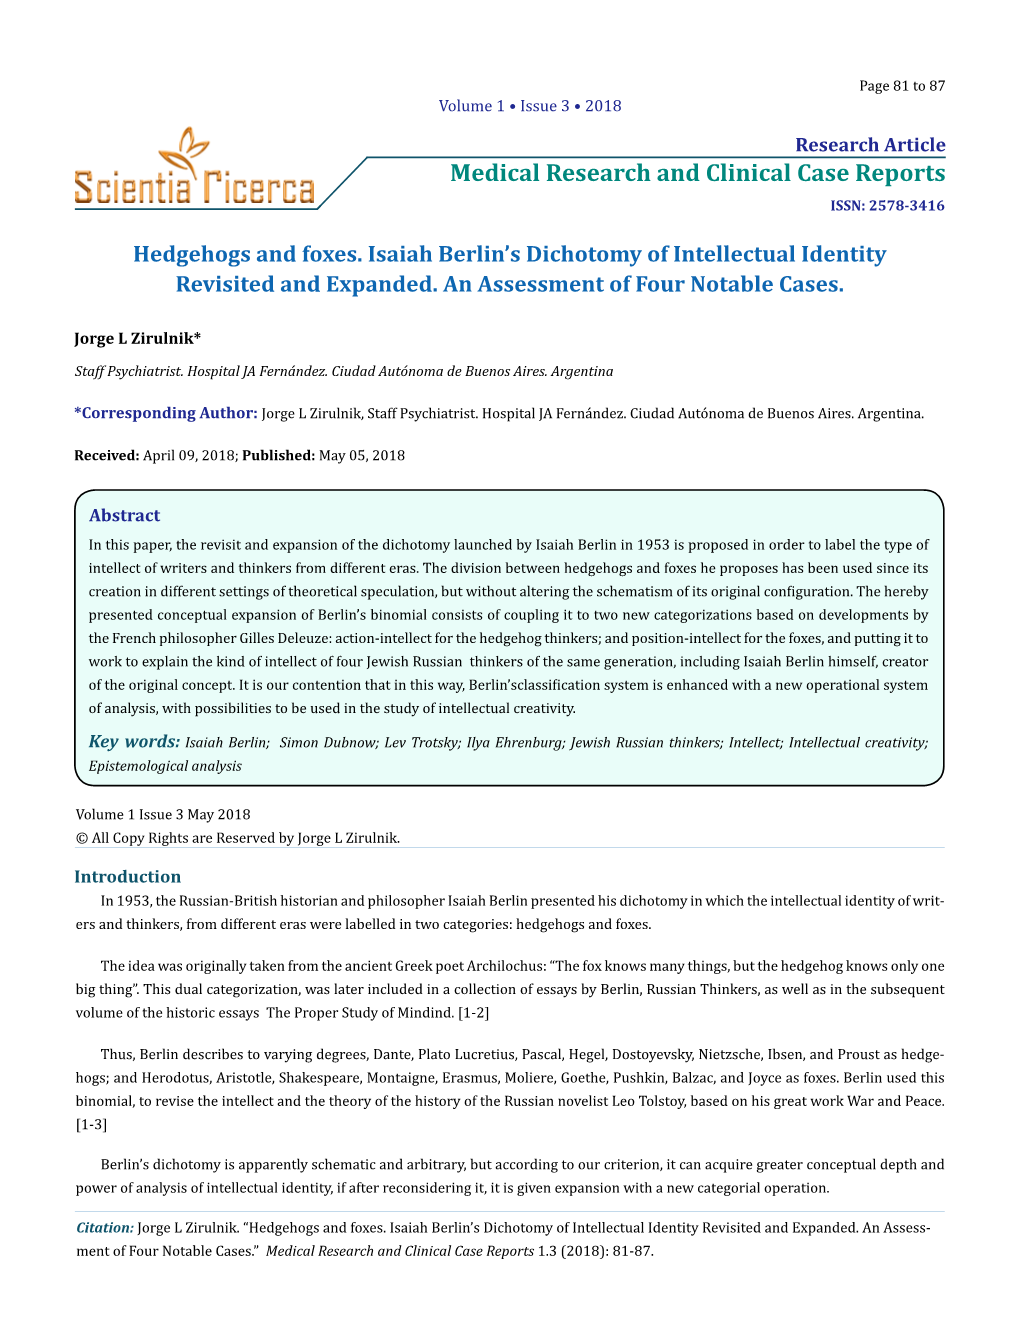 Medical Research and Clinical Case Reports ISSN: 2578-3416